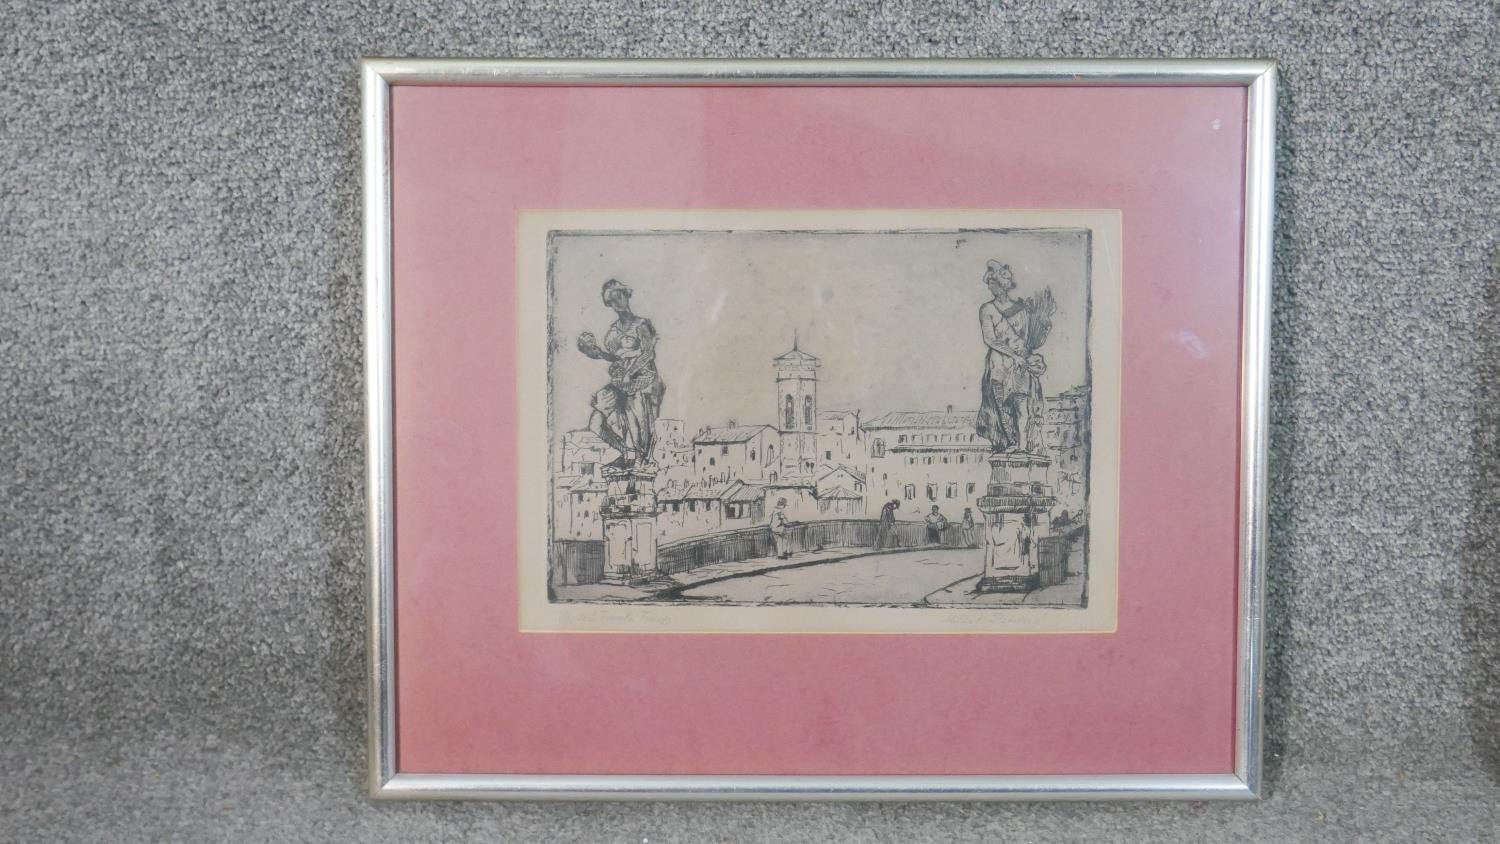 Milan Petrovic (1893 - 1978), etching on paper of Ponte Santa Trinita, Firenze, along with a pair of - Image 4 of 14